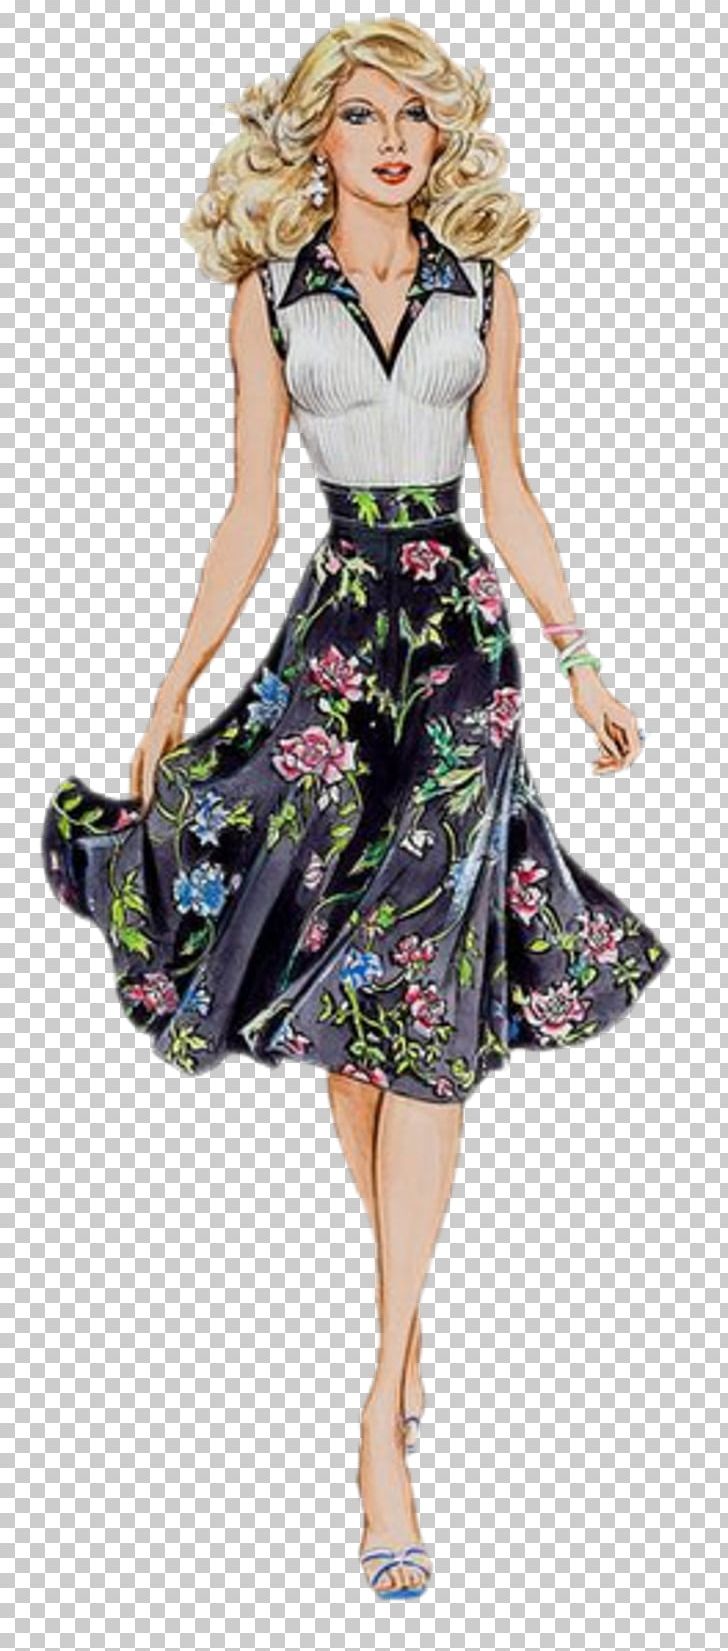 Fashion Illustration Drawing Sketch PNG, Clipart, Art, Artist, Celebrities, Clothing, Costume Free PNG Download